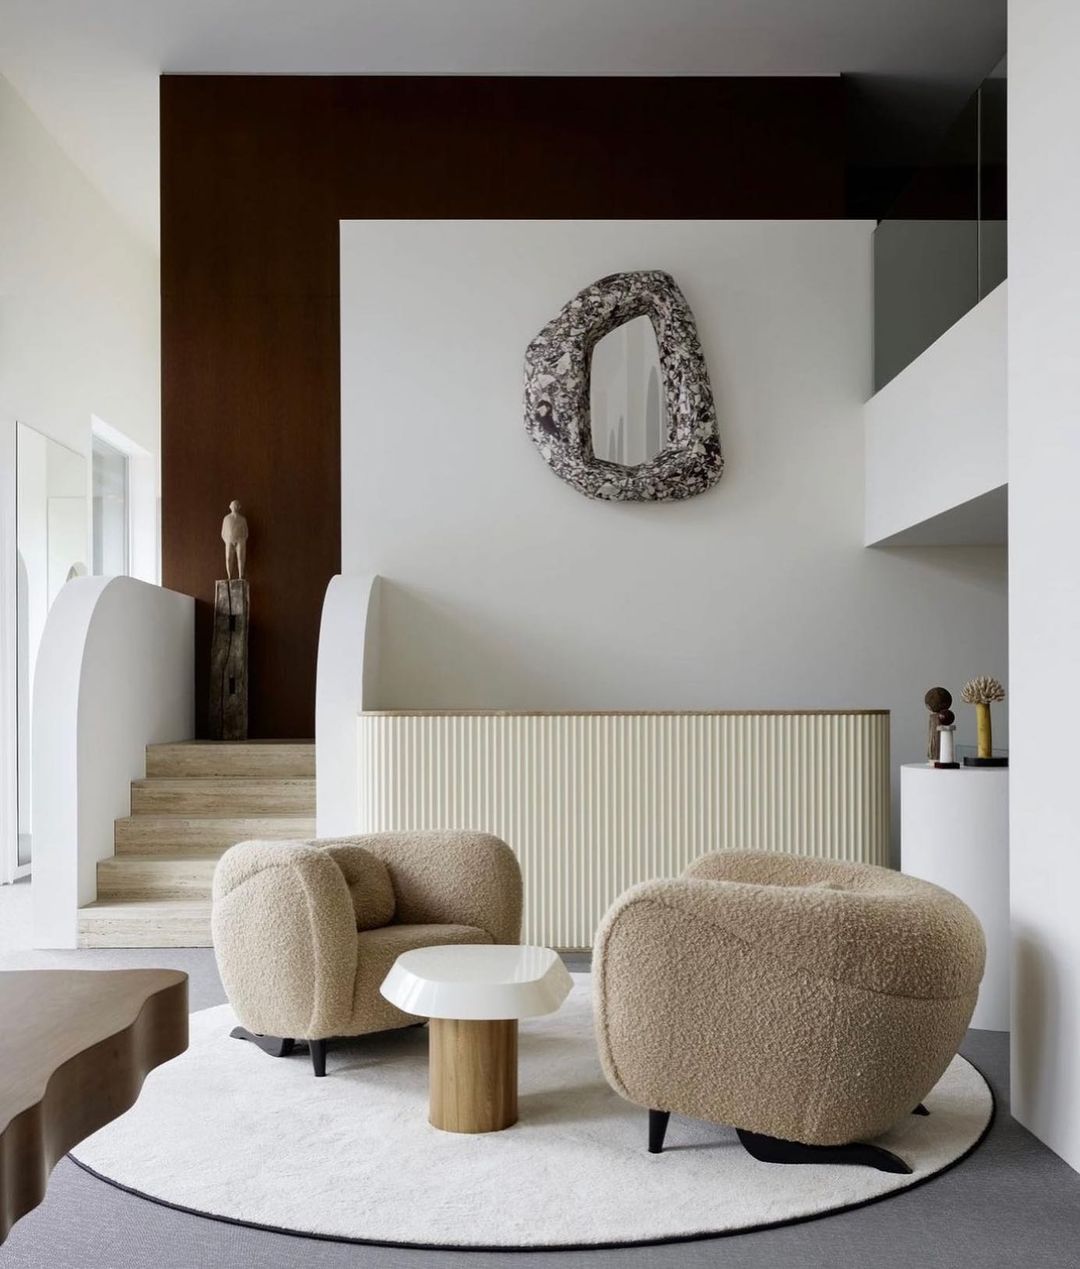 The Power of Less: How to Achieve a Minimalist Look in Your Home